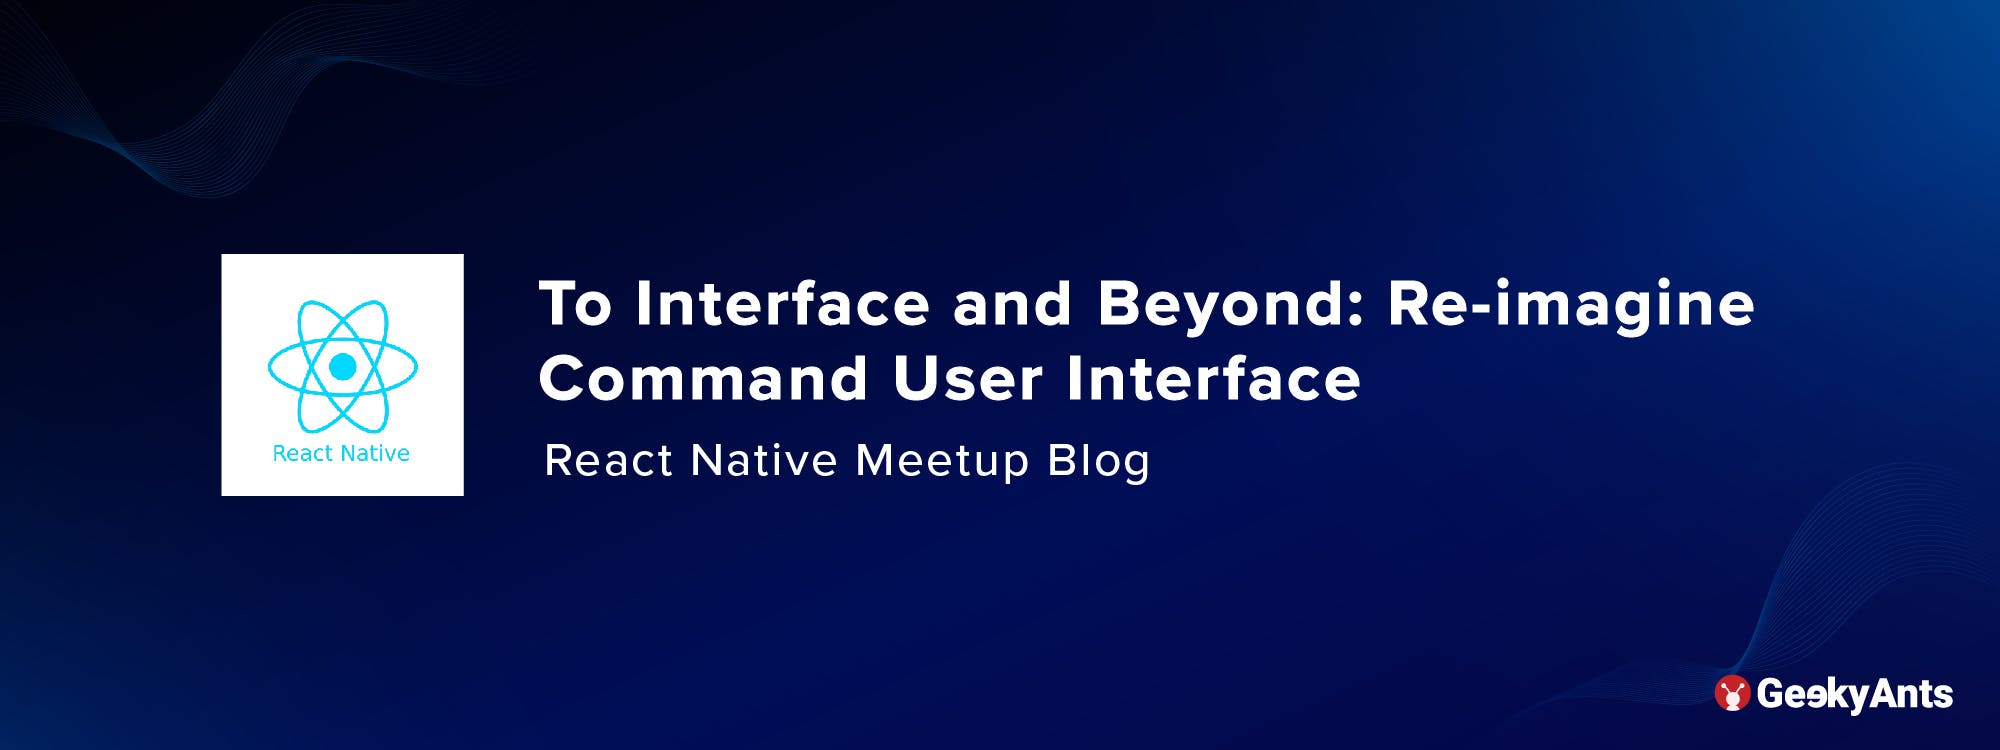 To Interface and Beyond: Re-imagine Command User Interface